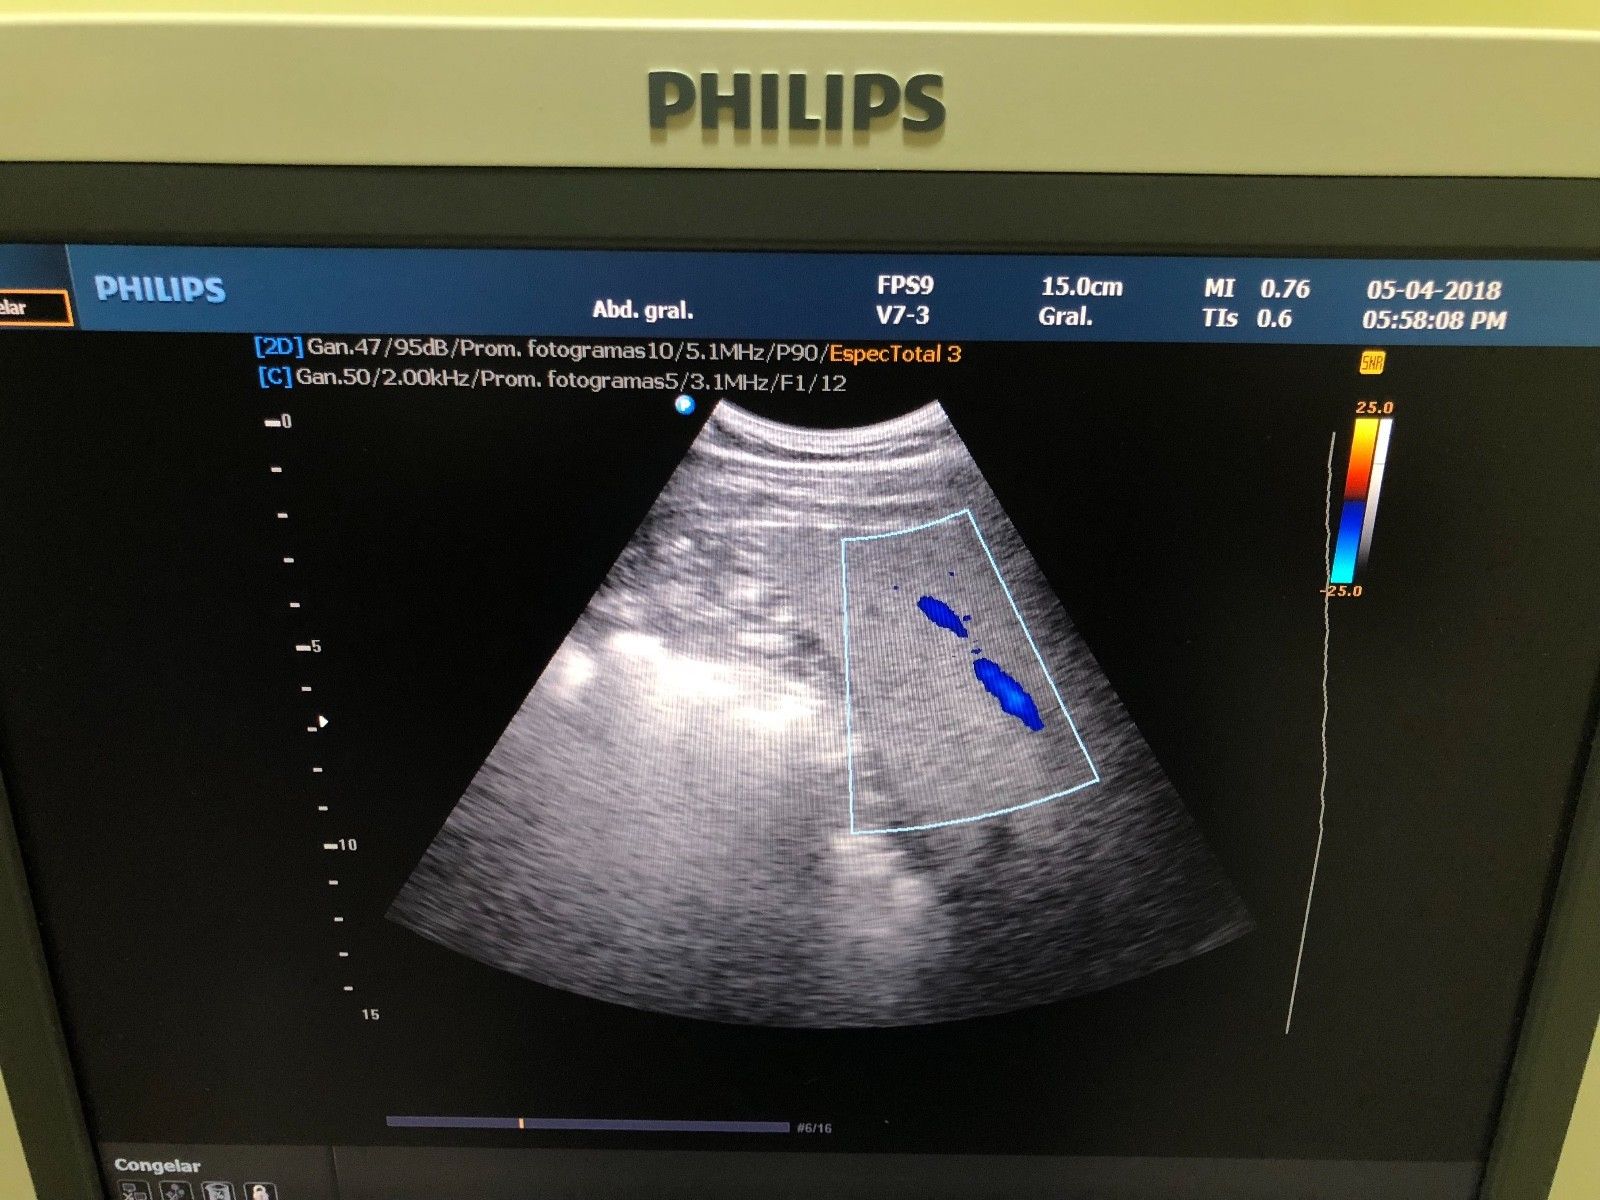 PHILIPS V7-3 4D CONVEX PROBE FOR HD9 DIAGNOSTIC ULTRASOUND MACHINES FOR SALE